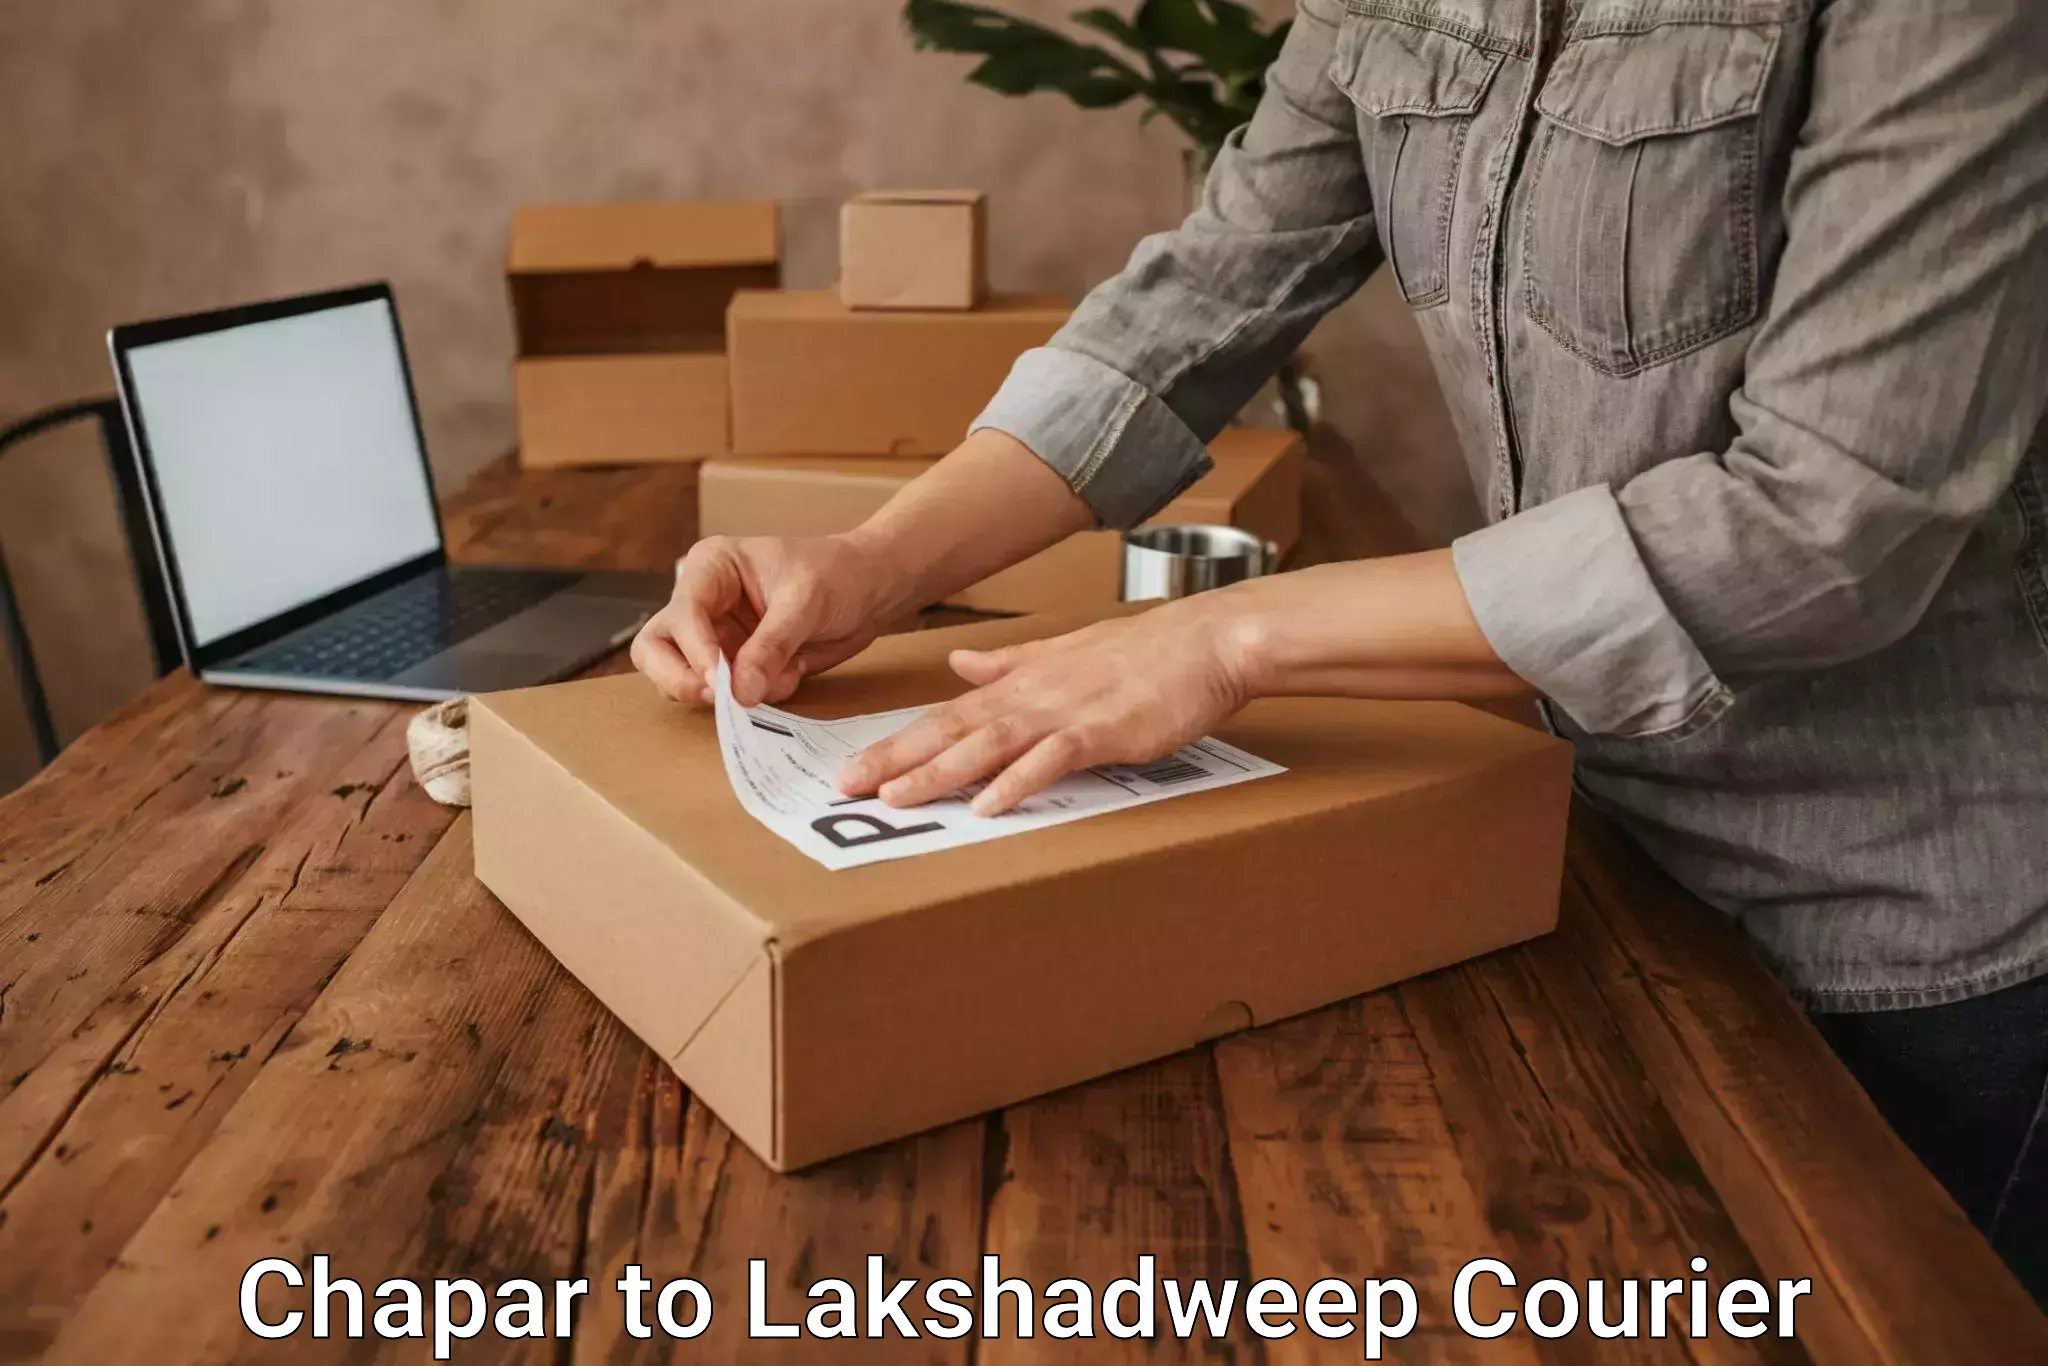 Courier service efficiency Chapar to Lakshadweep